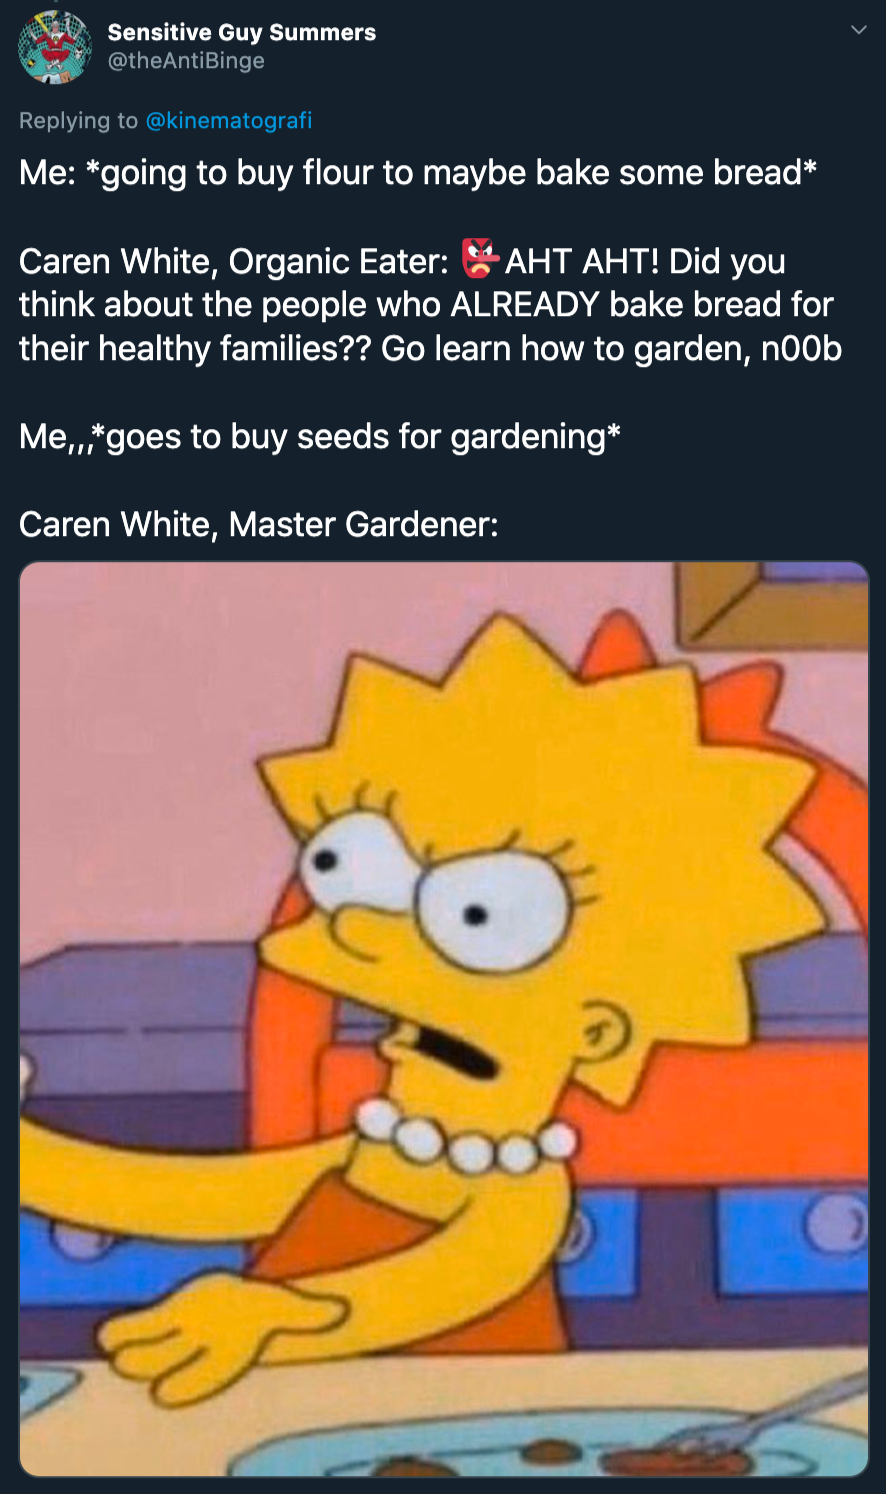 karen caren bread - me going to buy flour to maybe bake some bread. caren white organic eater aht aht did you think about the people who already bake bread for their families? go learn how to garden noob. me goes to buy seeds for gardening. caren white: m